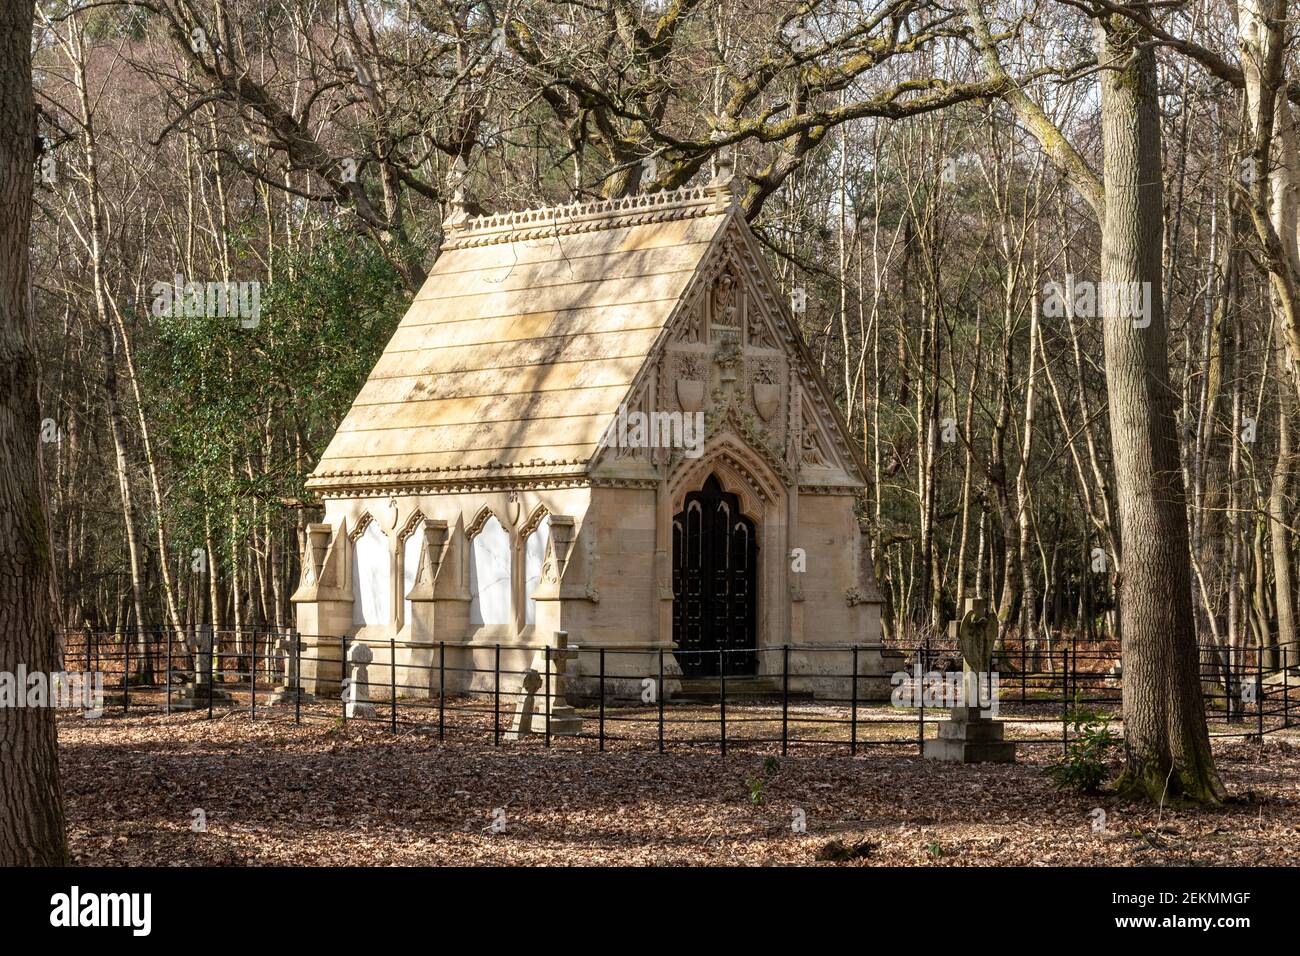 The Colquhoun Family Mausoleum constructed with bath stone completed in 1858 in woodland at Brookwood Cemetery, Surrey, England, UK Stock Photo